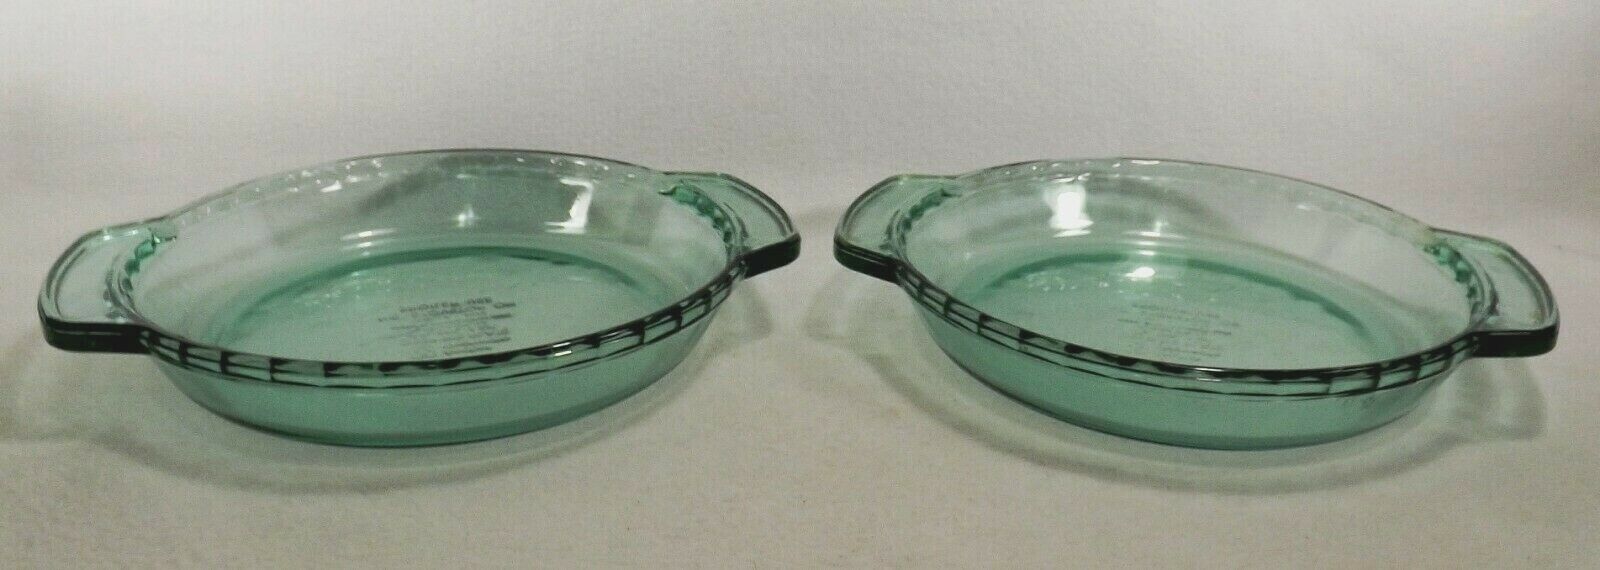 Set of 2 Anchor Hocking Green Glass Deep Pie Plates Handled Fluted Edge 9